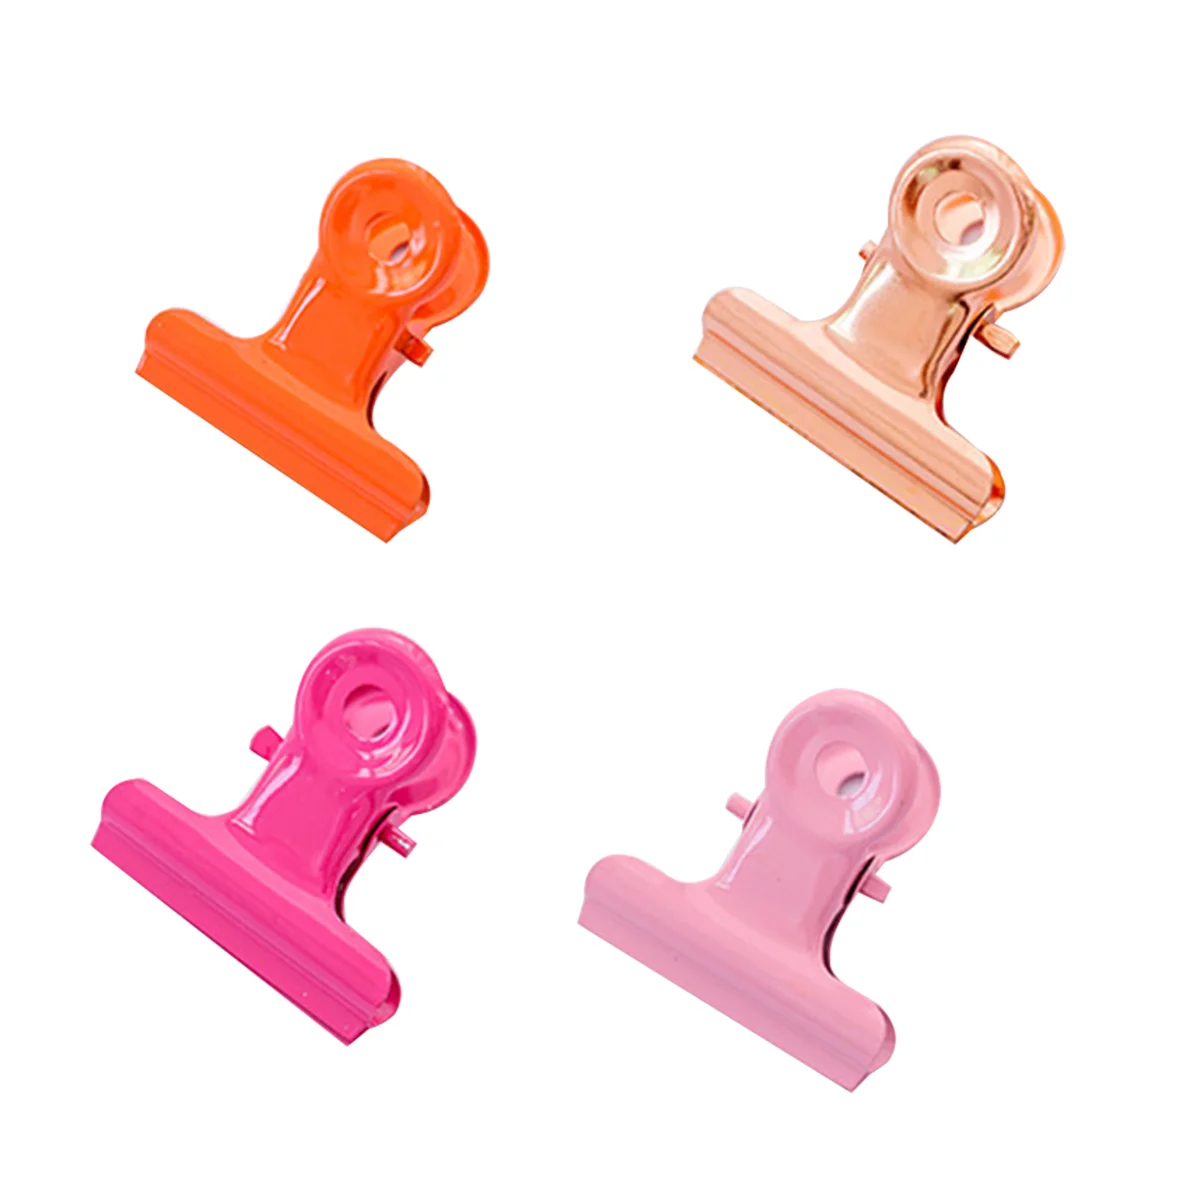 

10 pcs Receipt Clip Candy Color Invoice Clip Simple Organizer Clip for Home Office (Mixed Color)